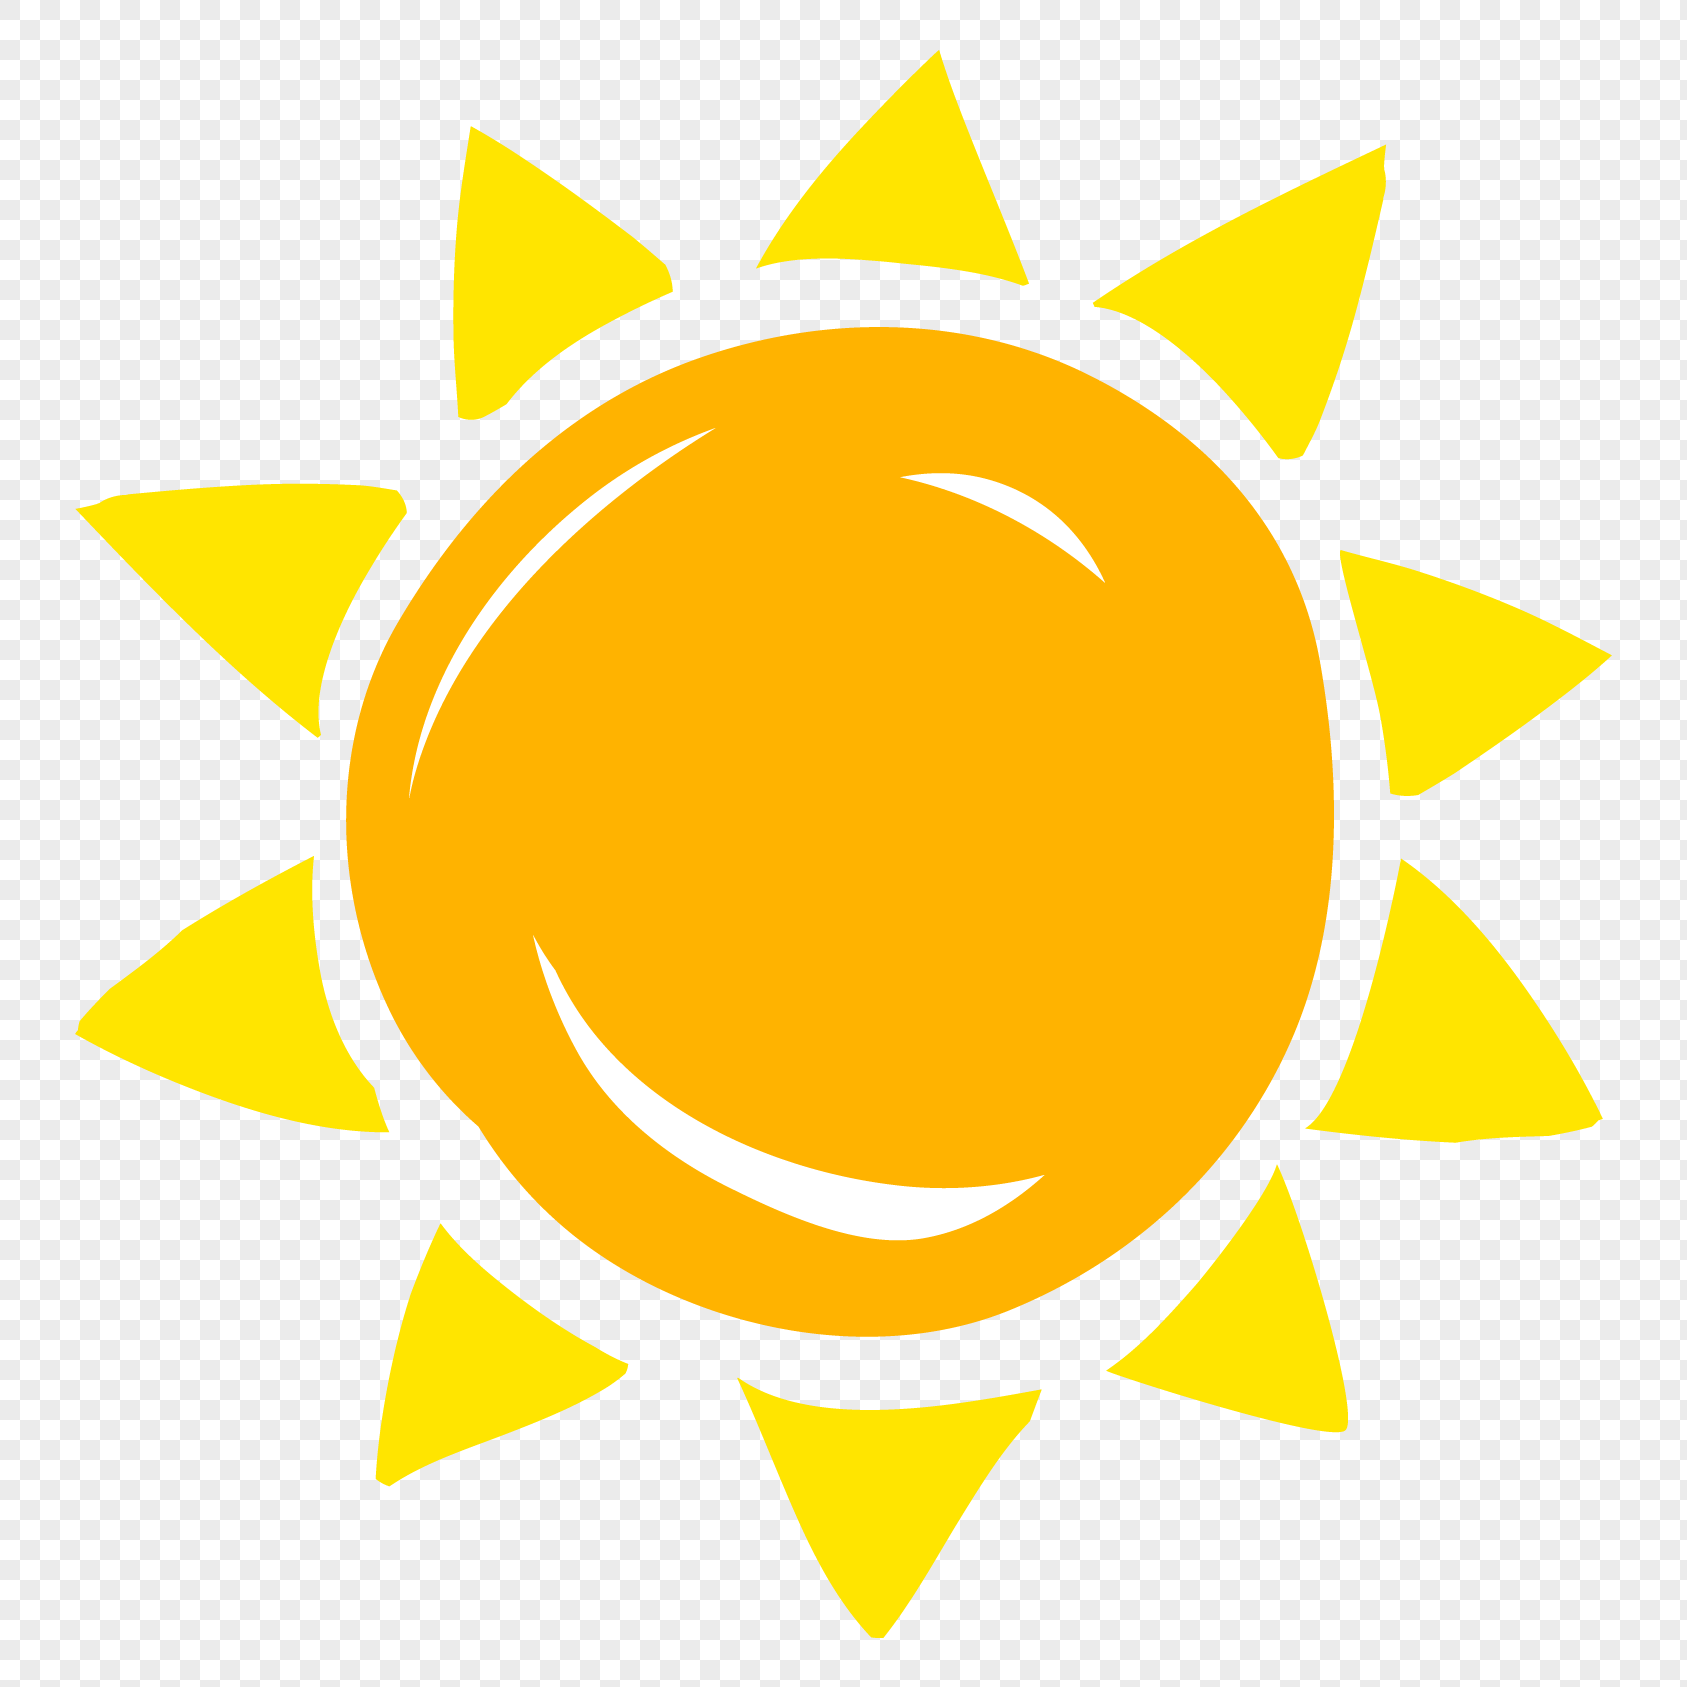 Painted Sun Logo - Hand painted sun png image_picture free download 400895483_lovepik.com